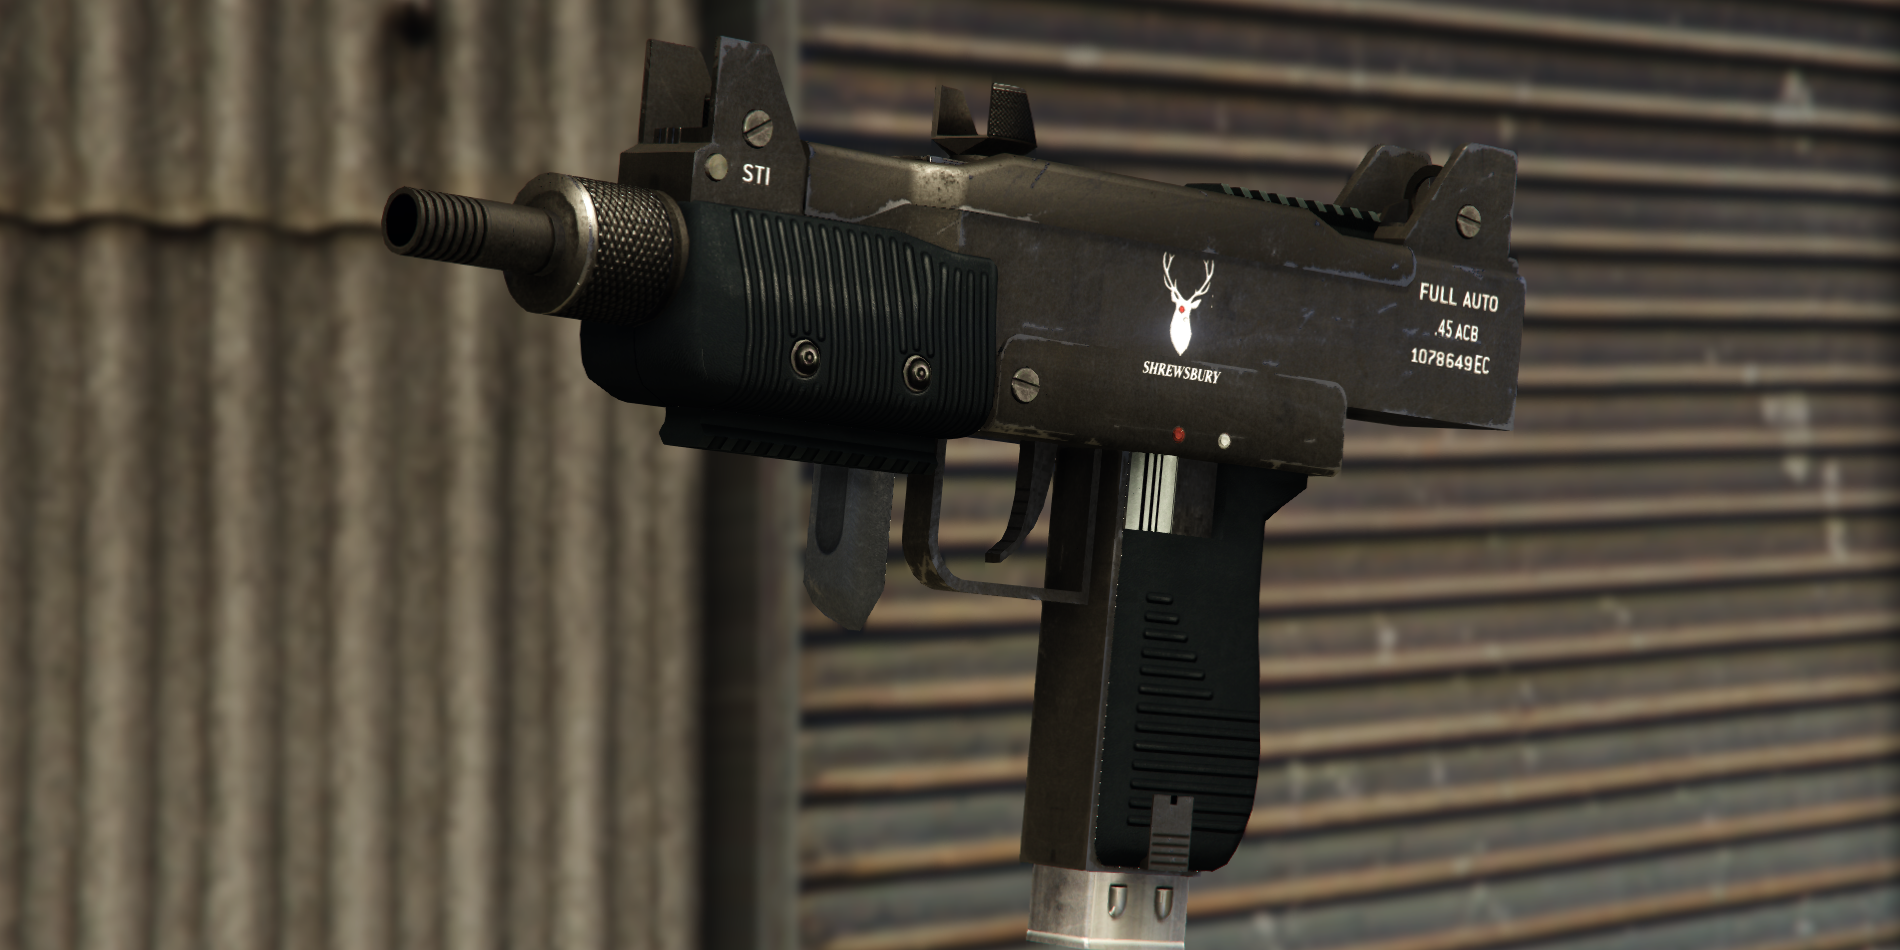 The Best Weapons In Gta V Ranked